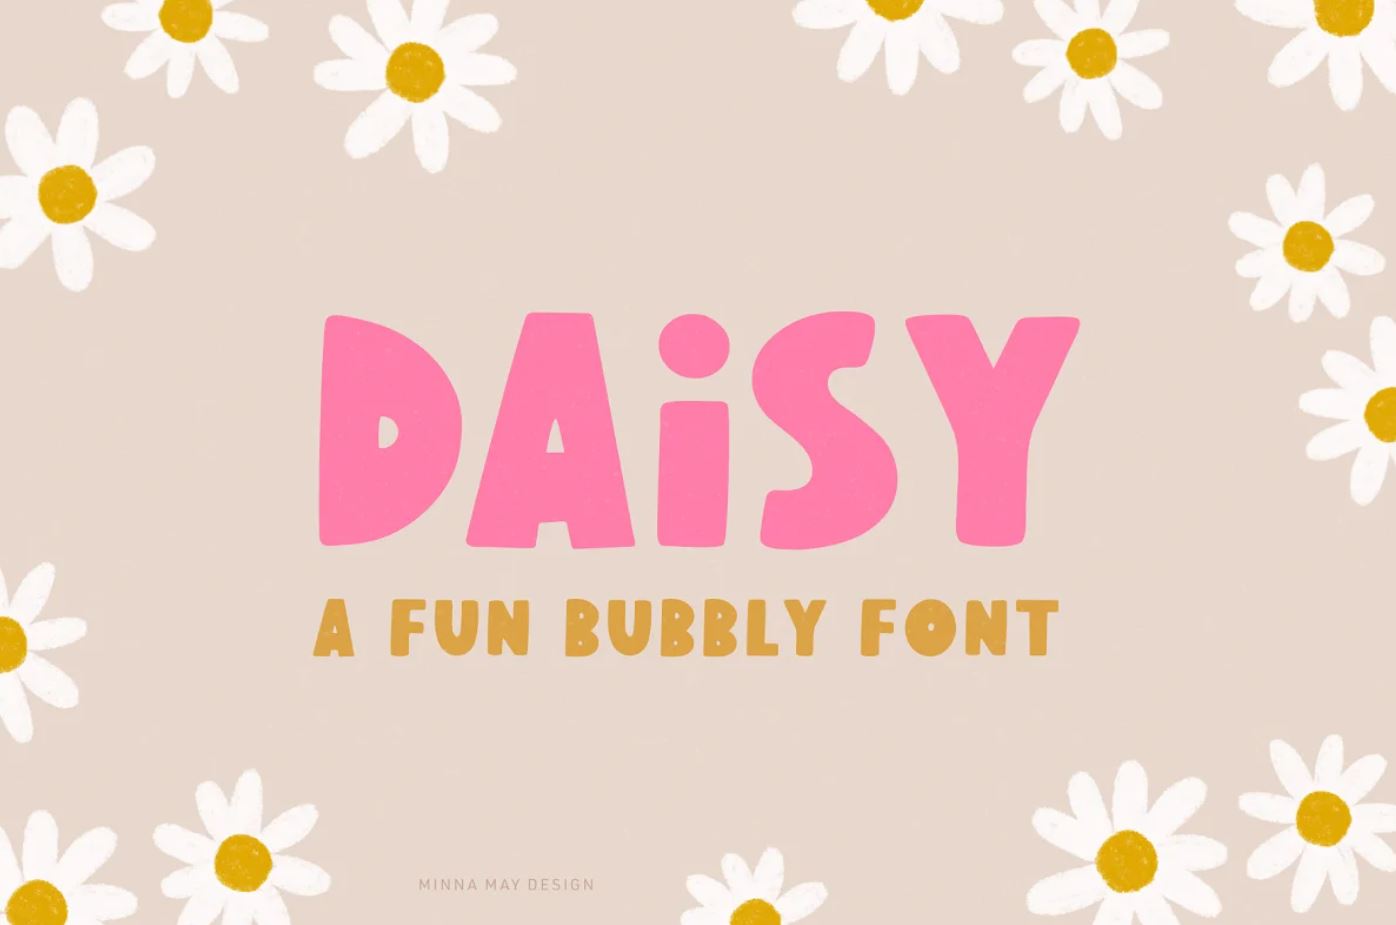 Fun Bubbly Style Font